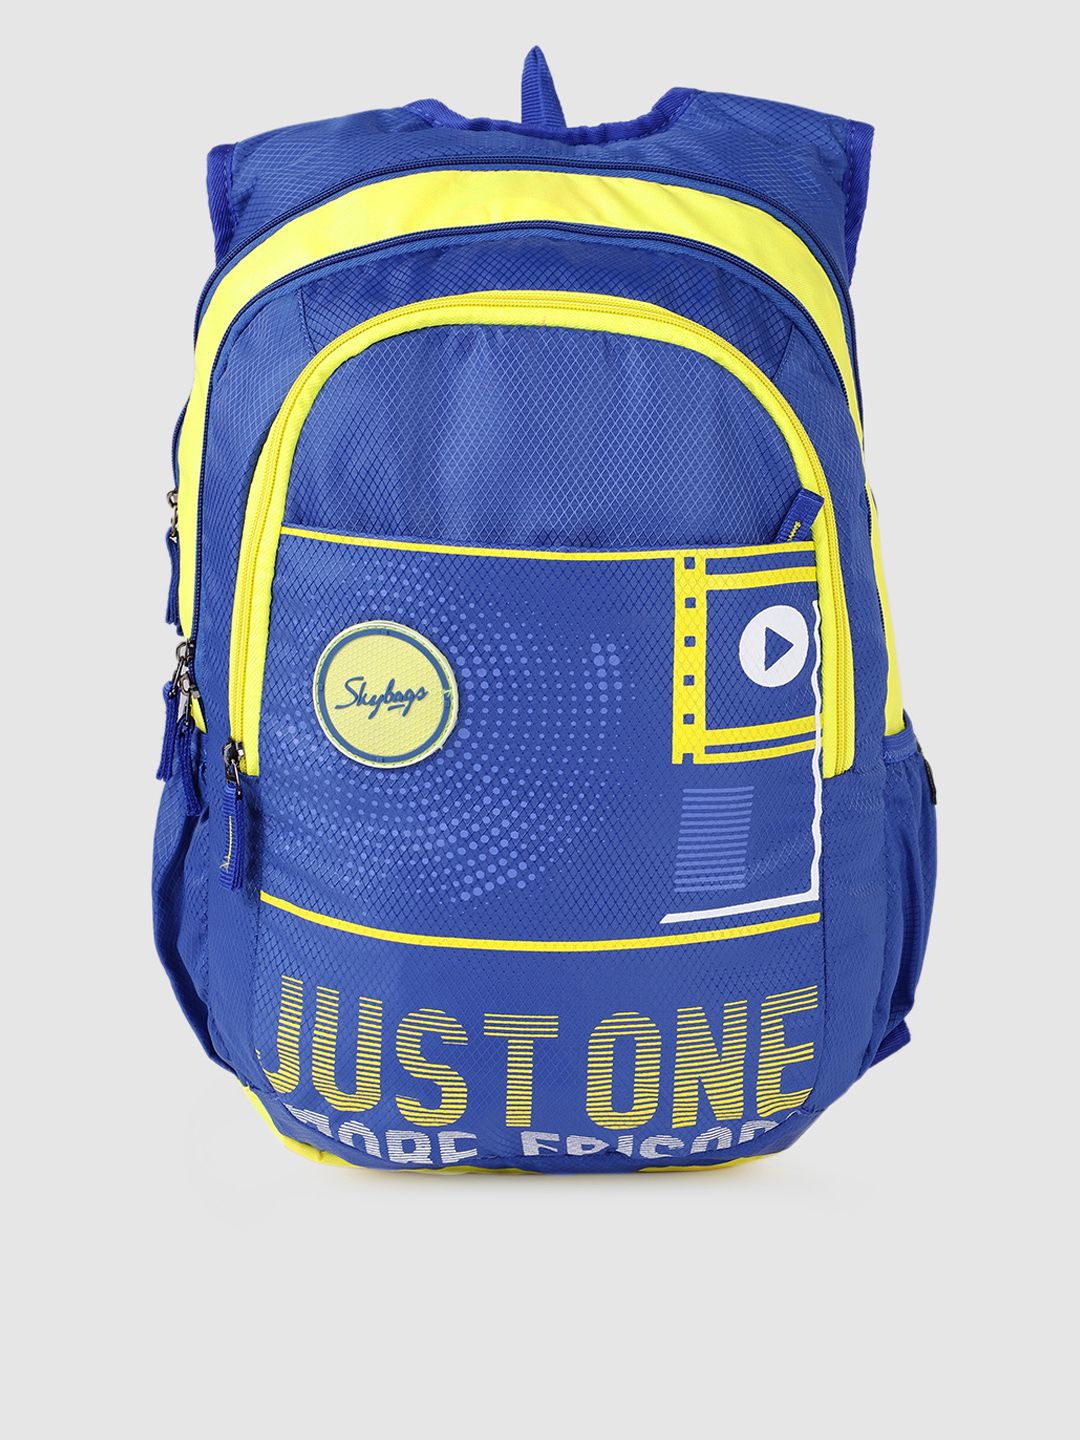 Skybags Unisex Blue & Yellow Printed Komet 05 Laptop Backpack Price in India